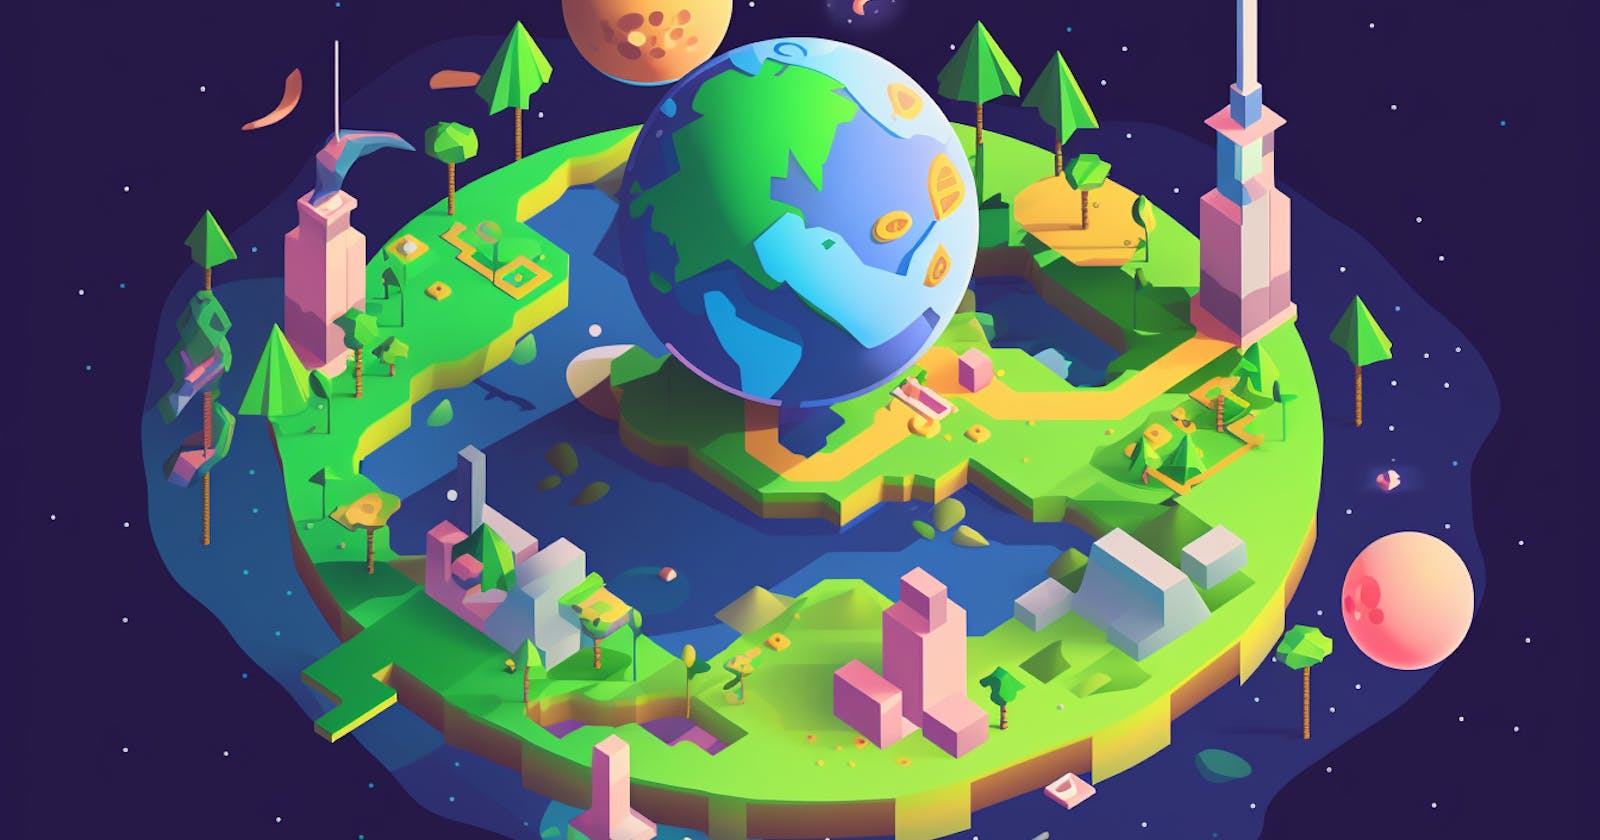 User-generated gaming - Worlds within worlds